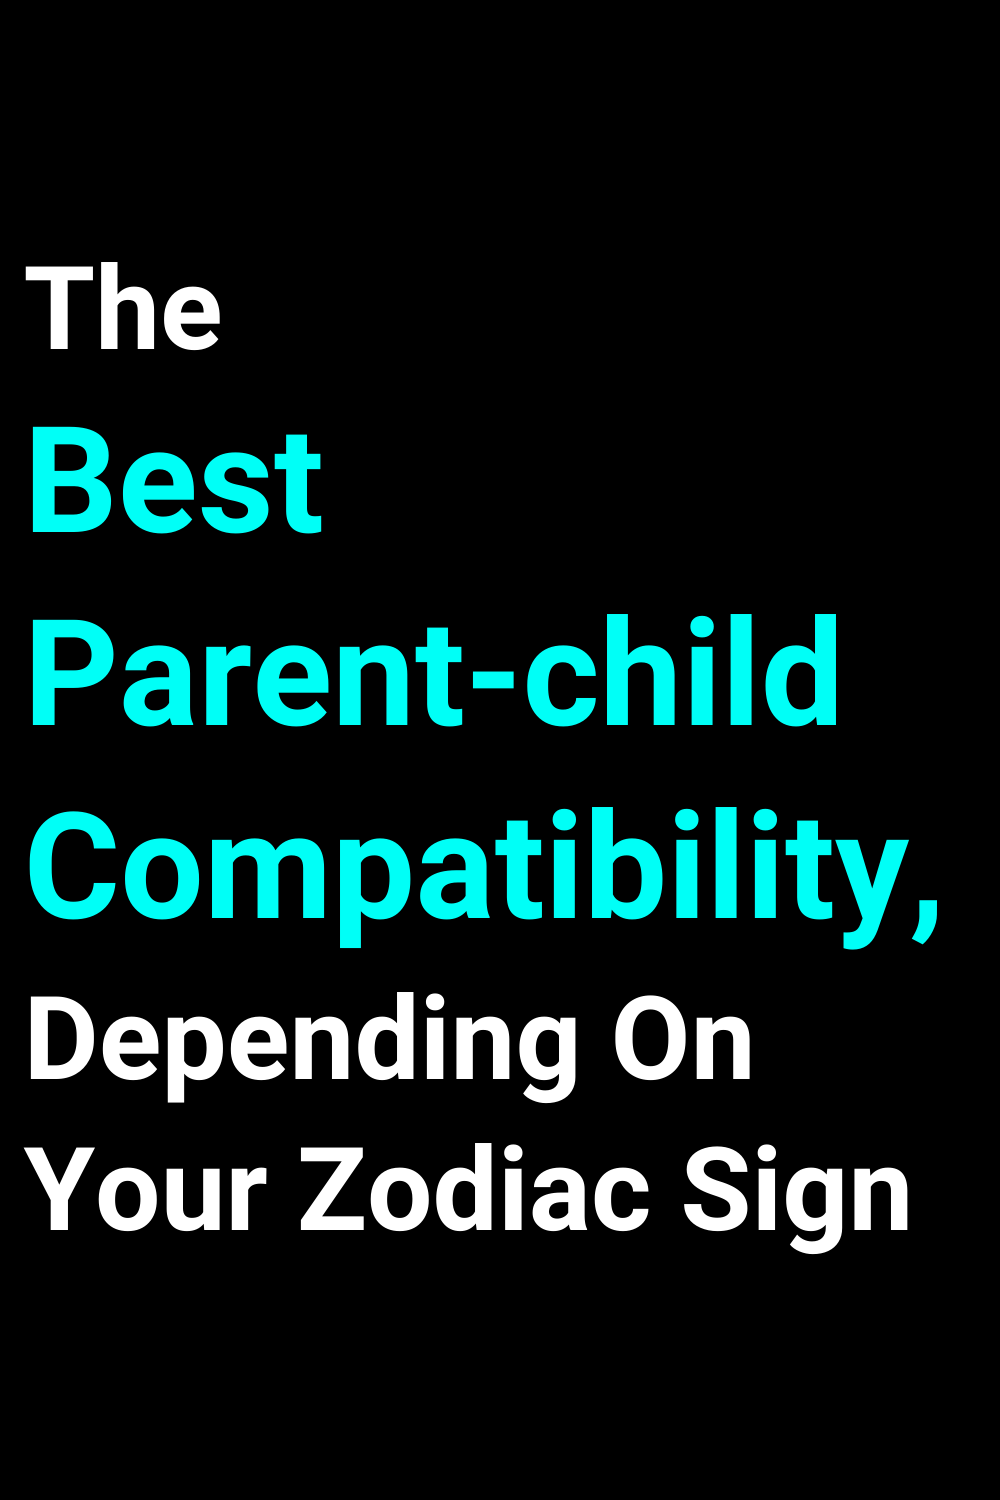 The Best Parent-child Compatibility, Depending On Your Zodiac Sign